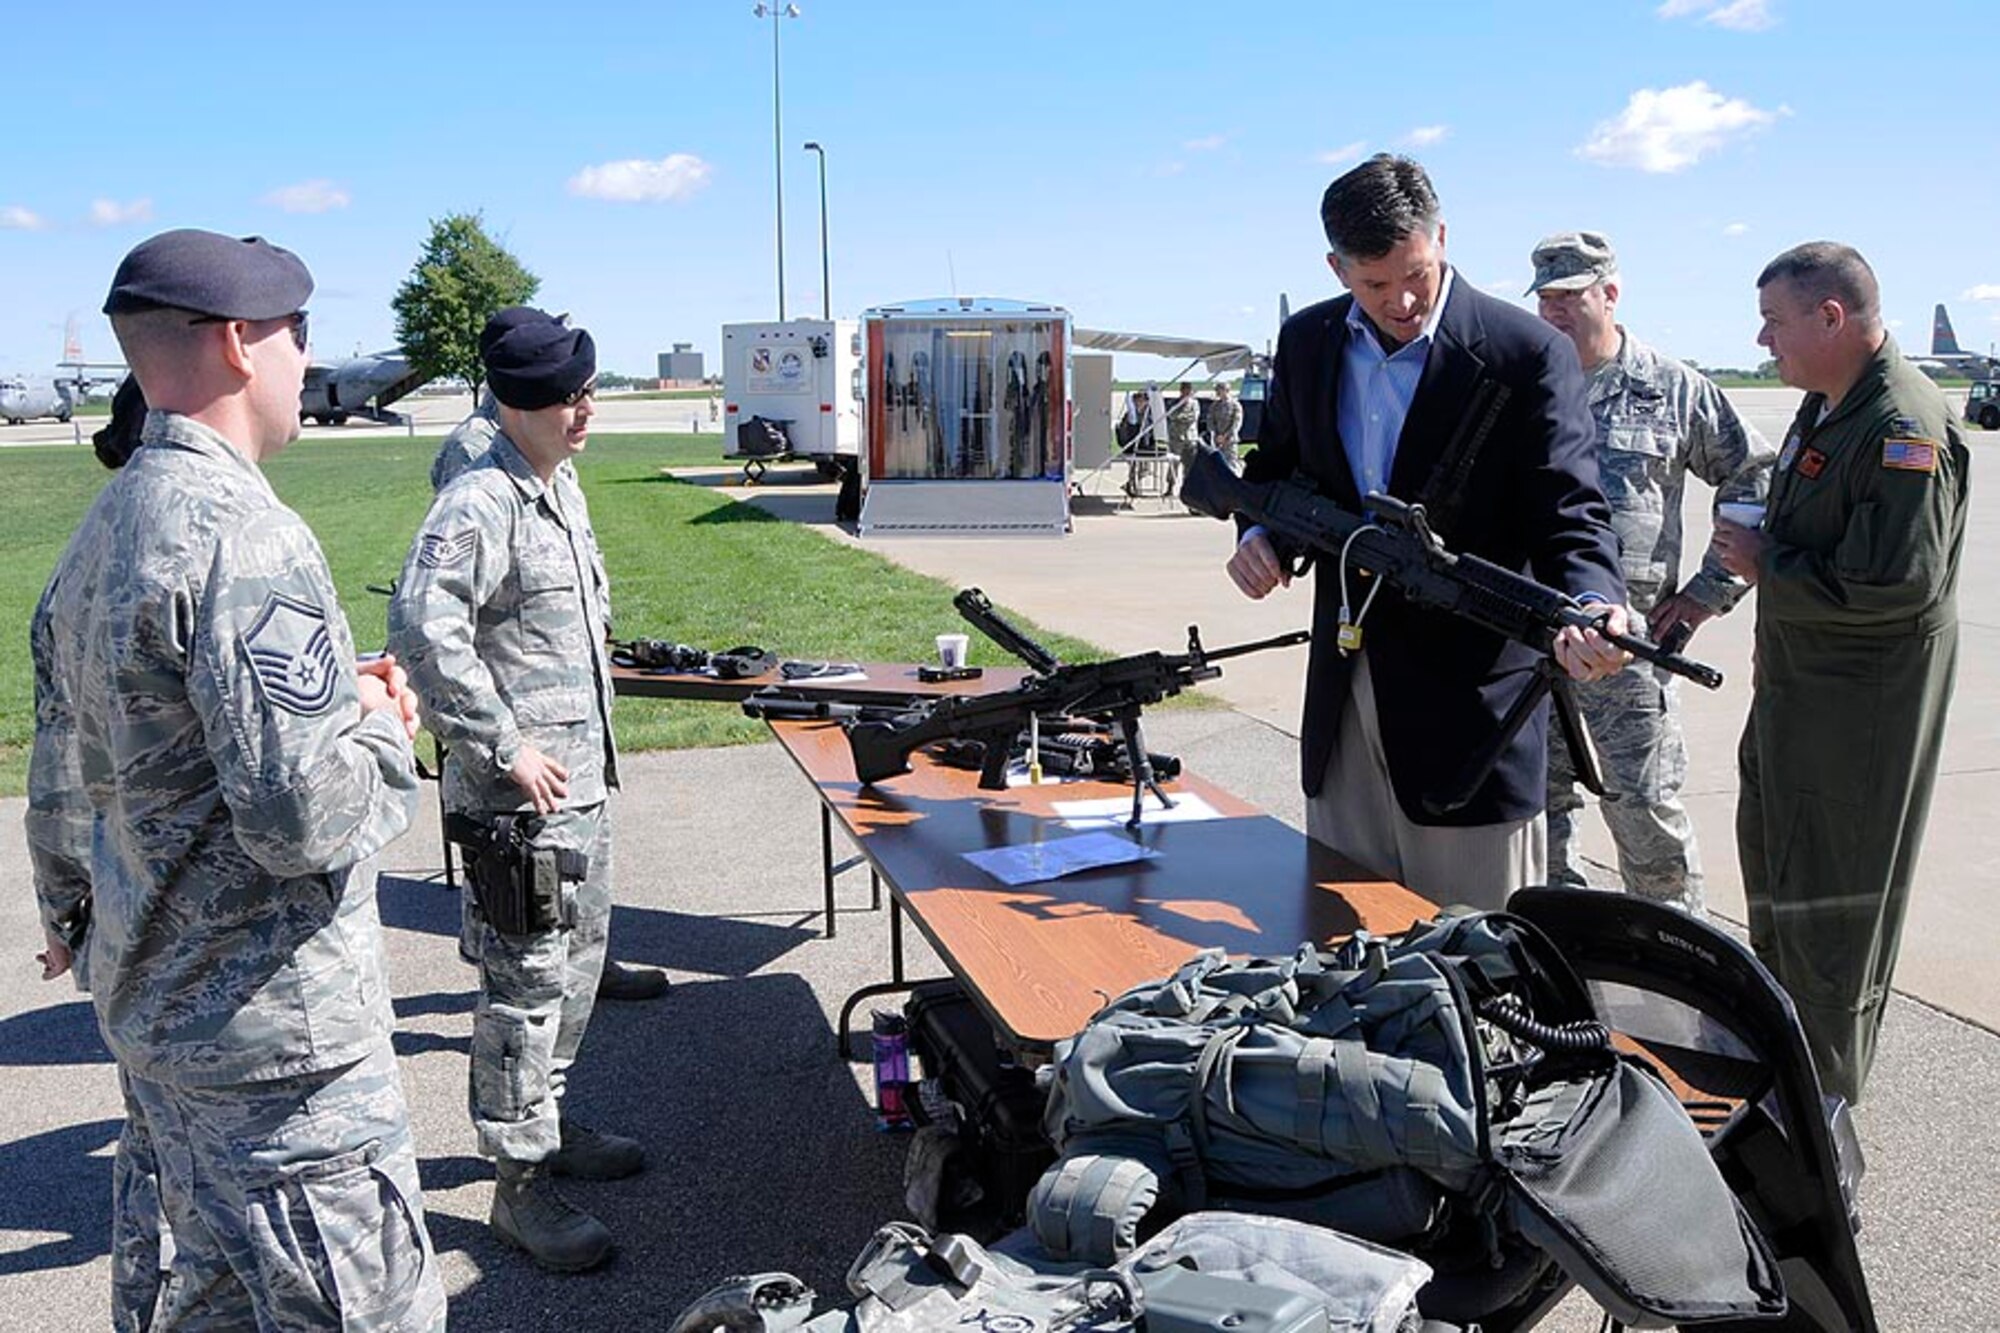 Illinois State Senator Darin LaHood handles a rifle at a Security Forces static display at the 182d Airlift Wing in Peoria, Ill. on Sep. 8, 2012. (U.S. Air Force photo by Tech Sgt. Todd Pendleton/Released).